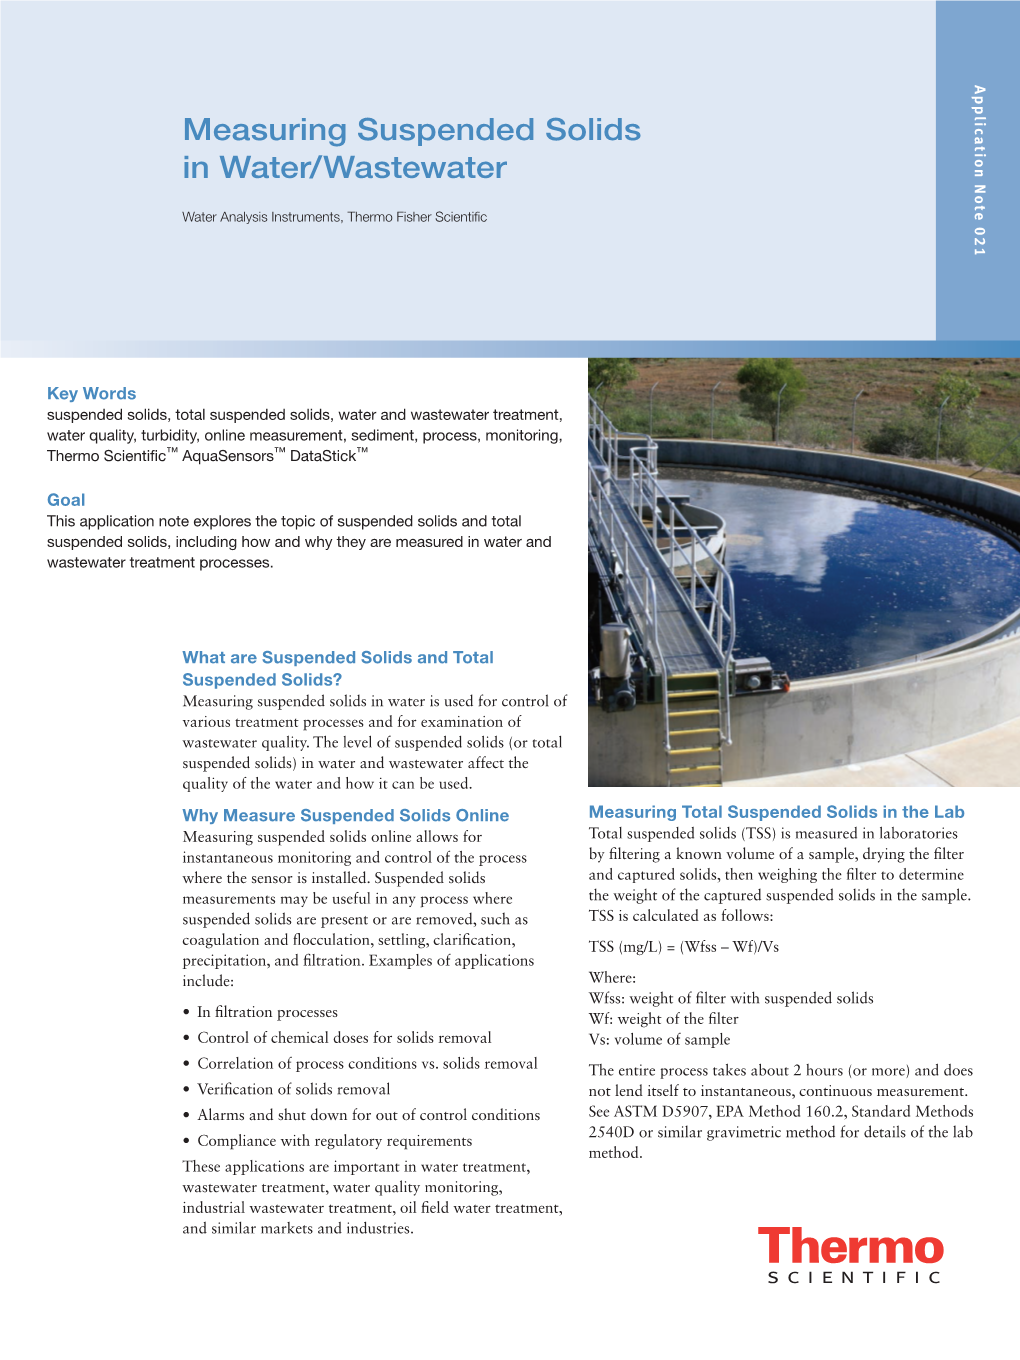 Measuring Suspended Solids in Water/Wastewater